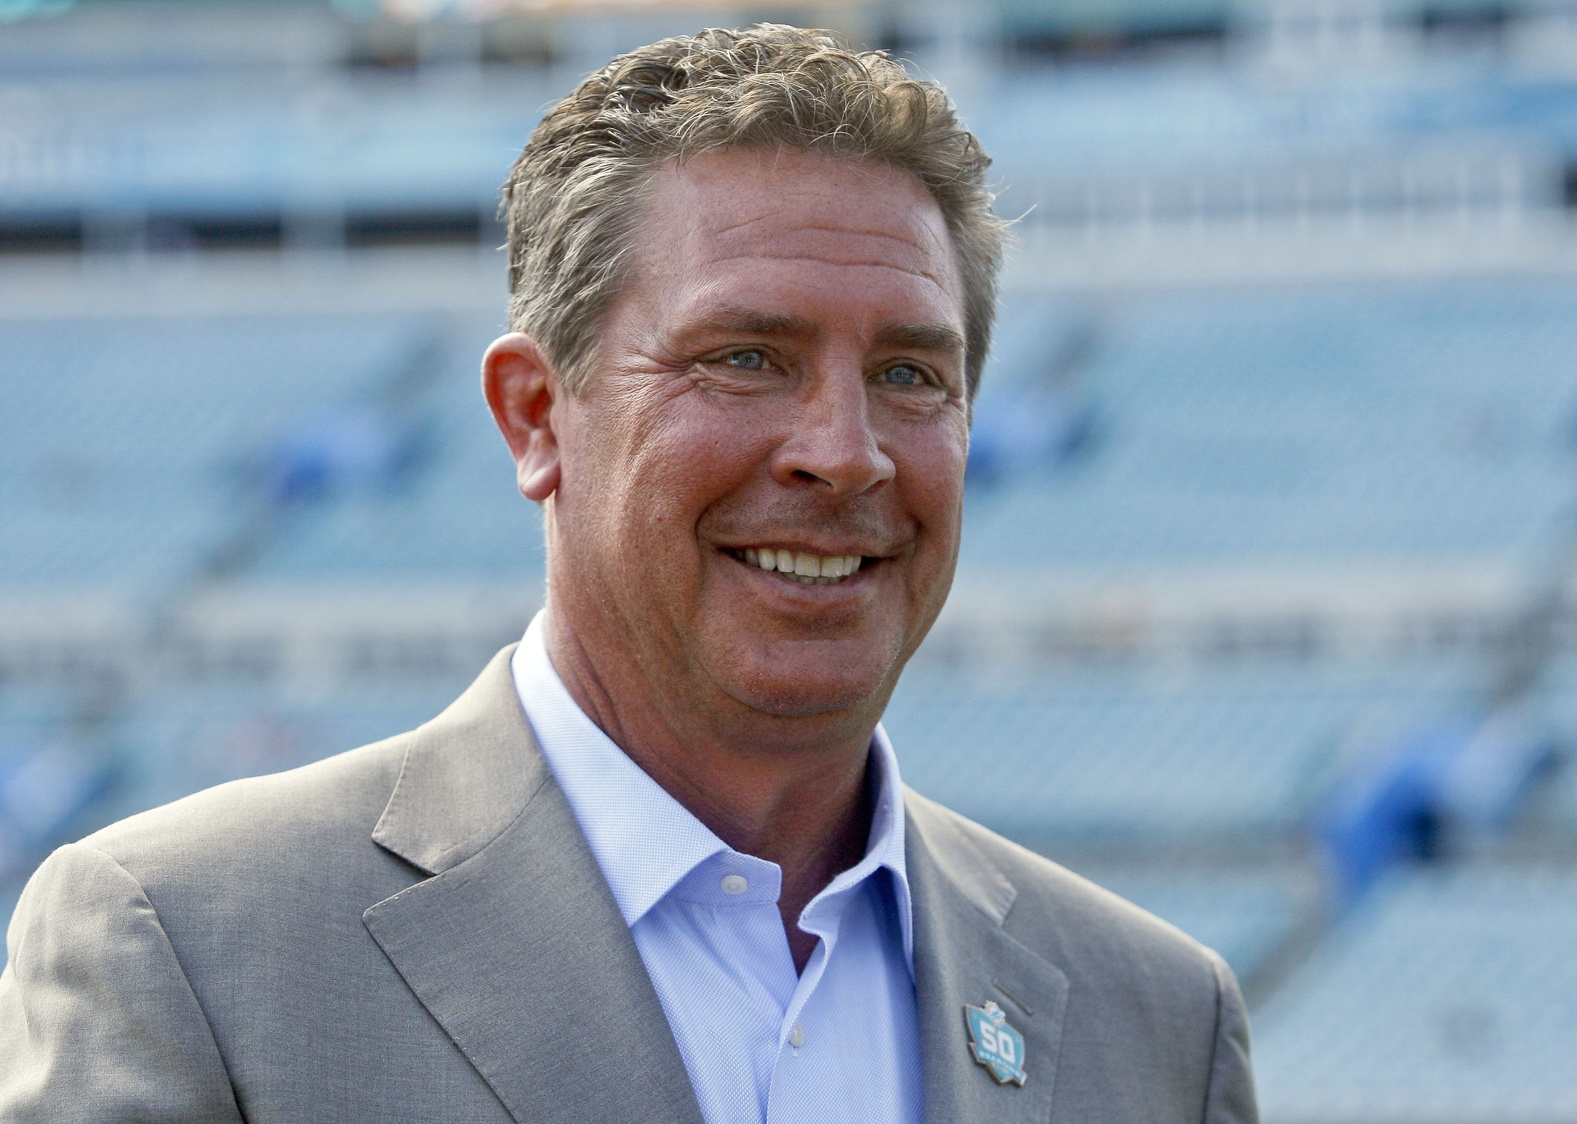 Dan Marino plays catch with Prince Harry in London